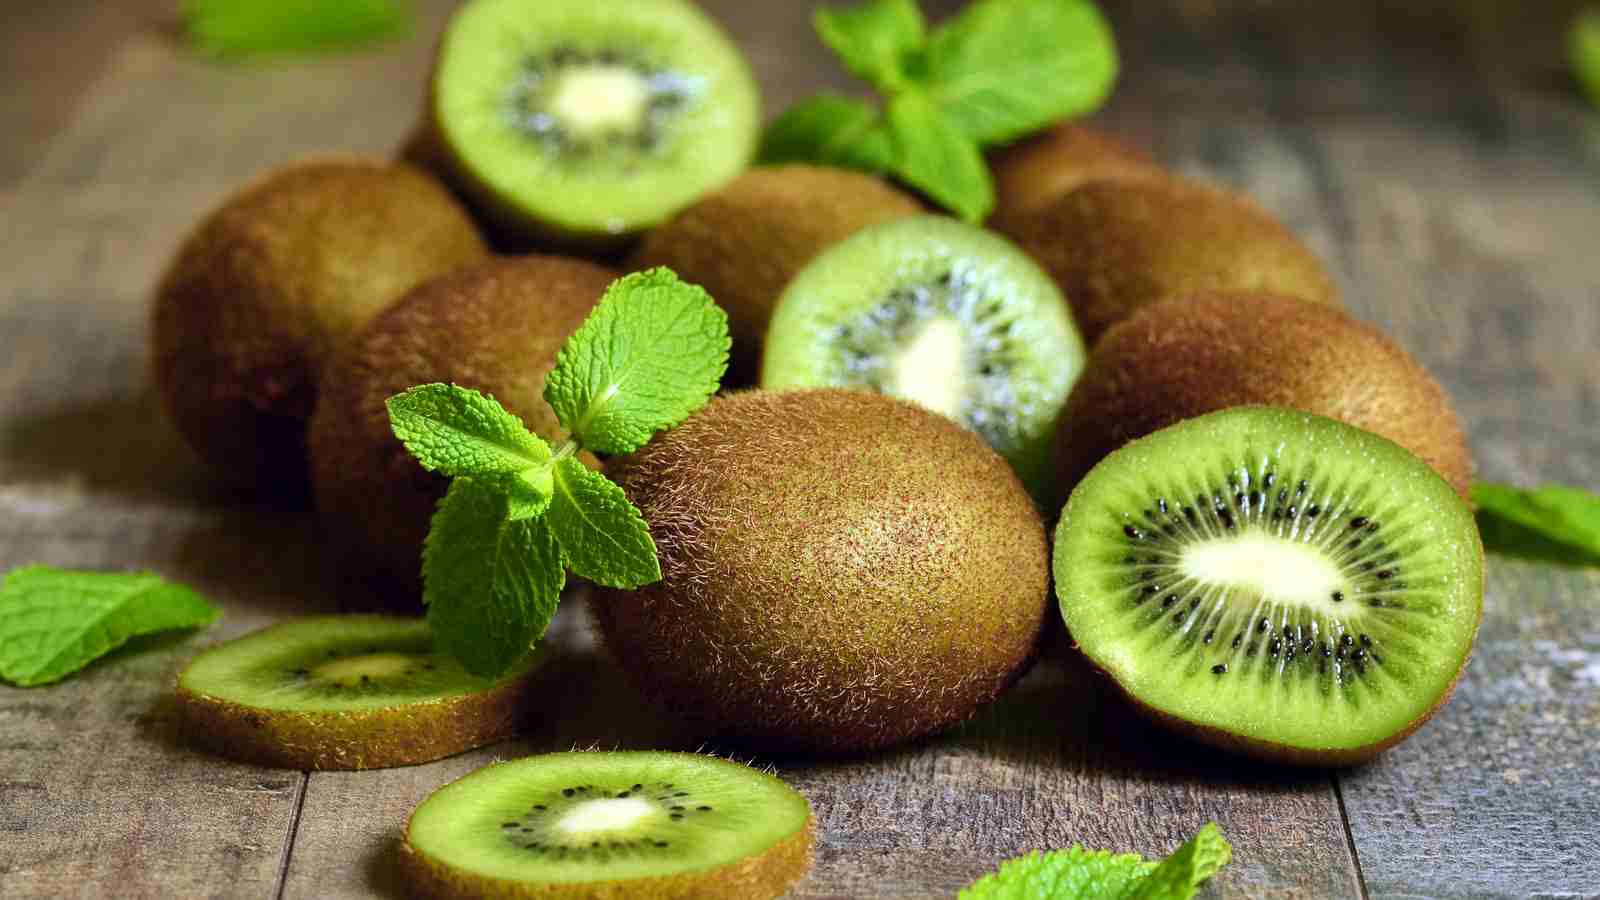  Side Effects of Kiwi Fruit during Pregnancy 